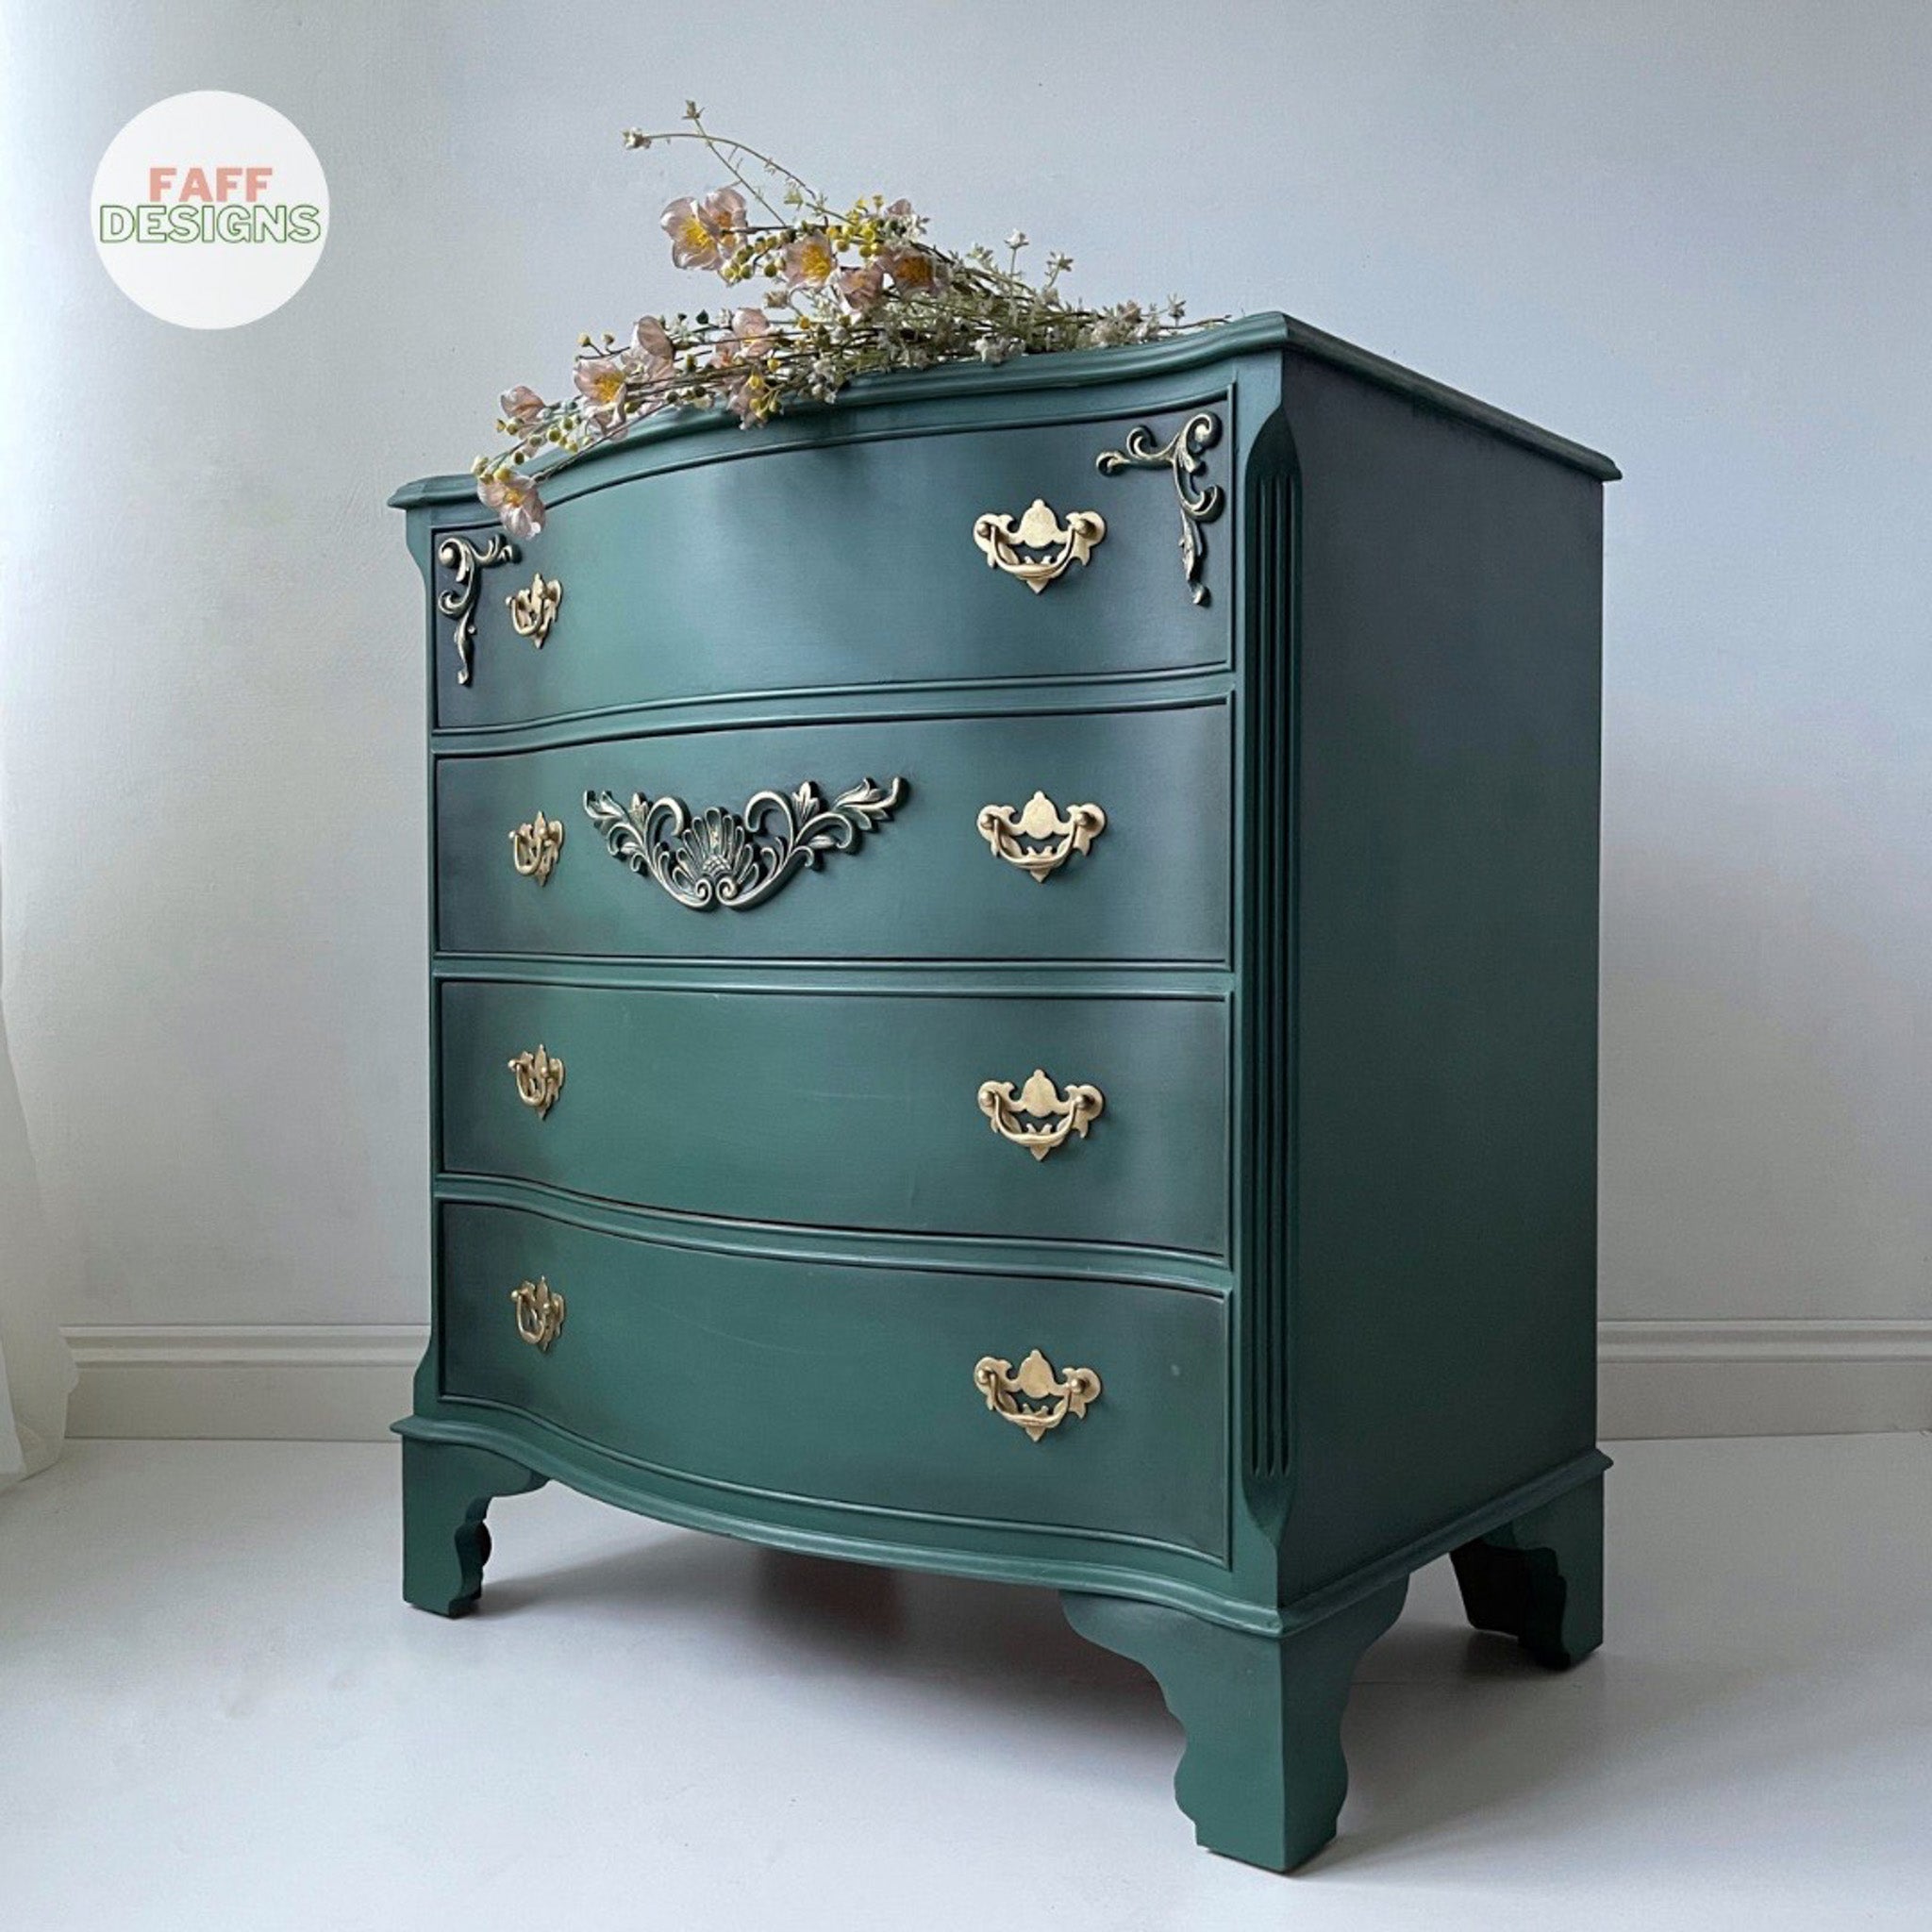 A small 4-drawer dresser refurbished by Faff Designs is painted in Dixie Belle's Palmetto with black wax accenting corners and details.